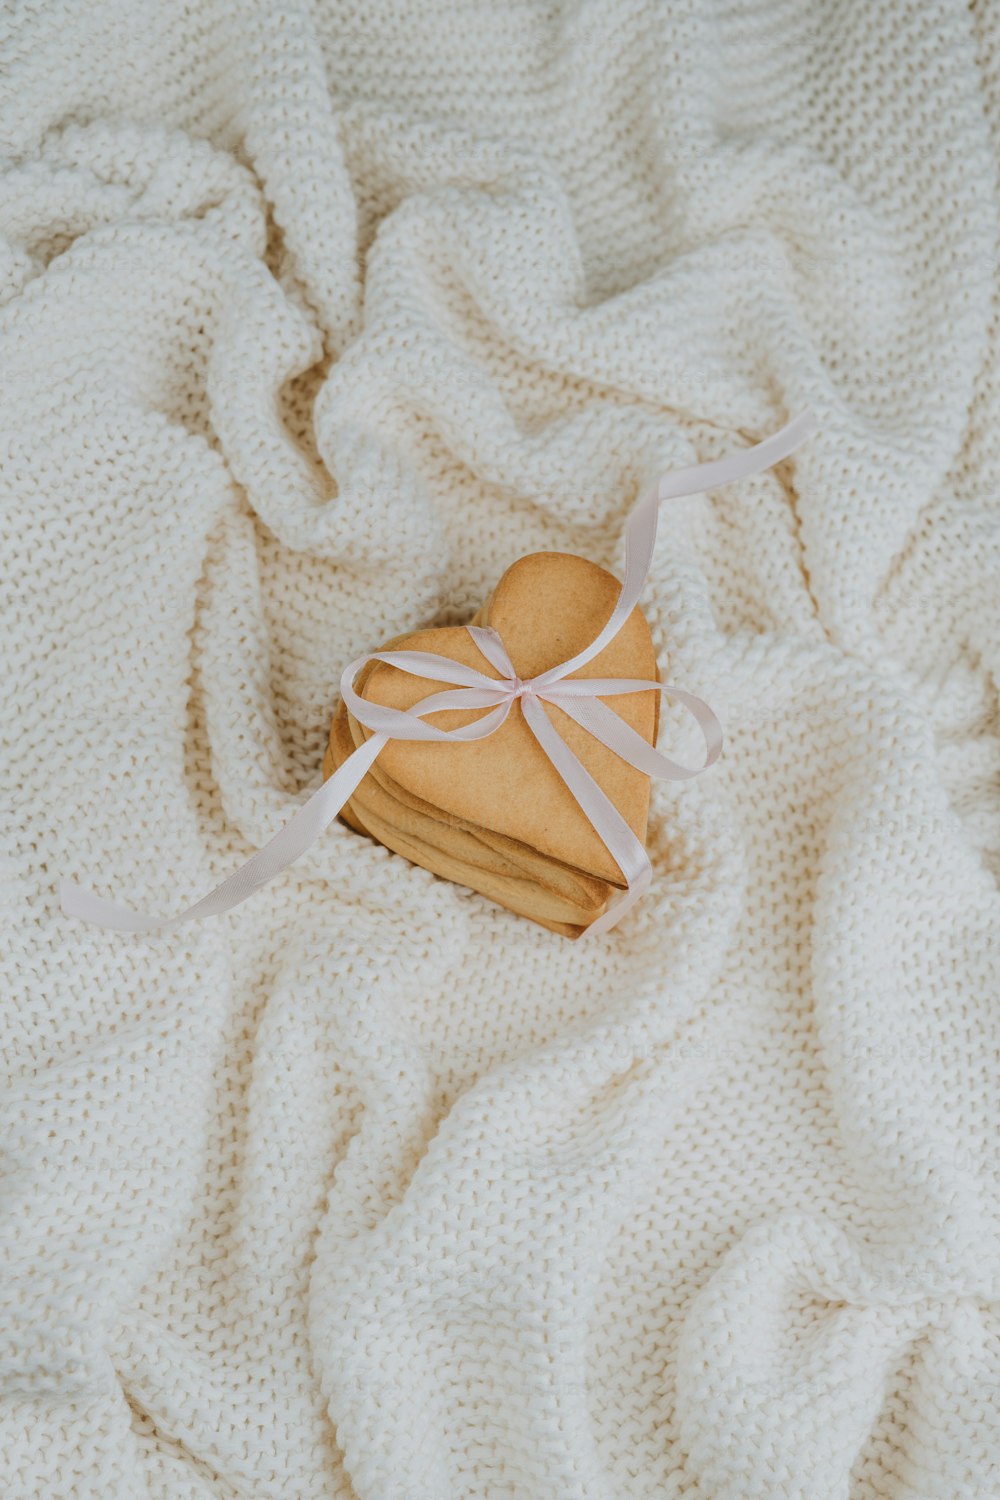 a heart shaped cookie on a white blanket